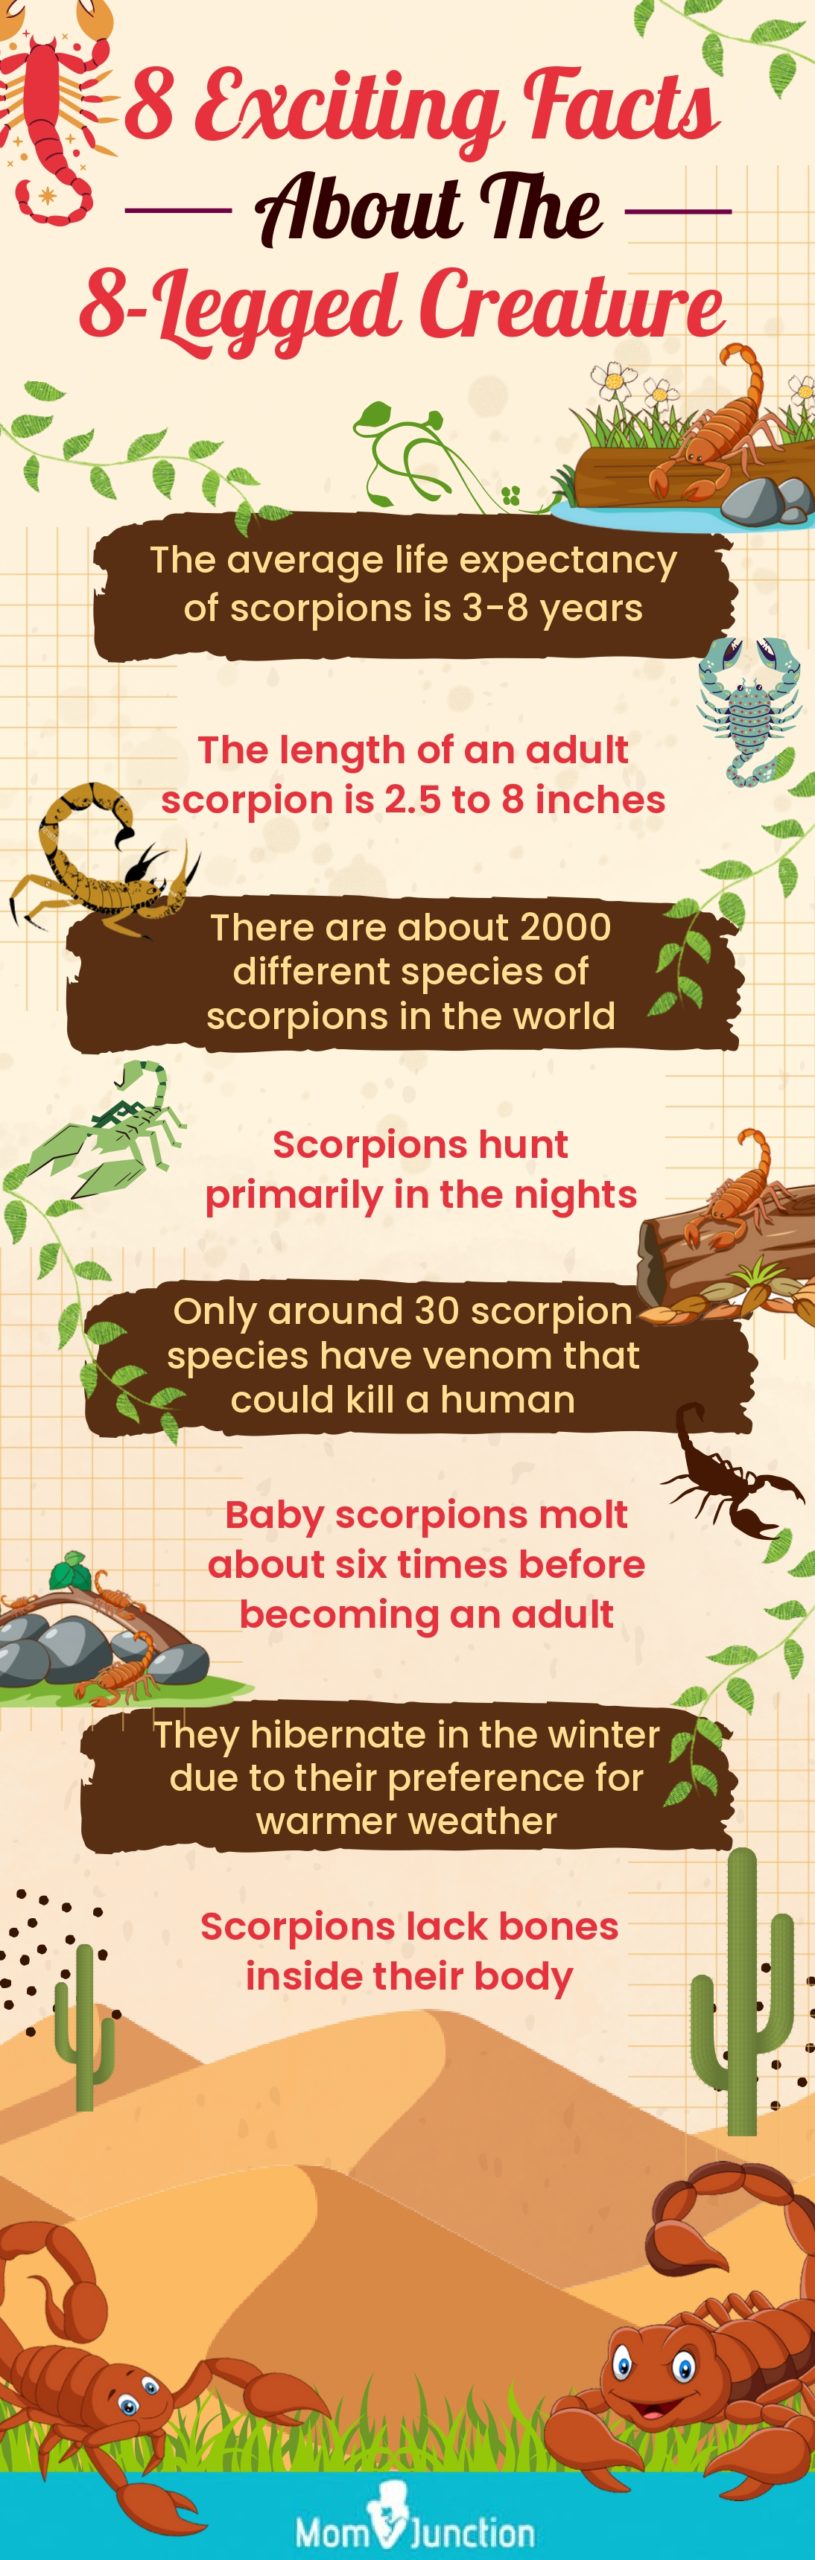 8 exciting facts about the 8 legged creature (infographic)